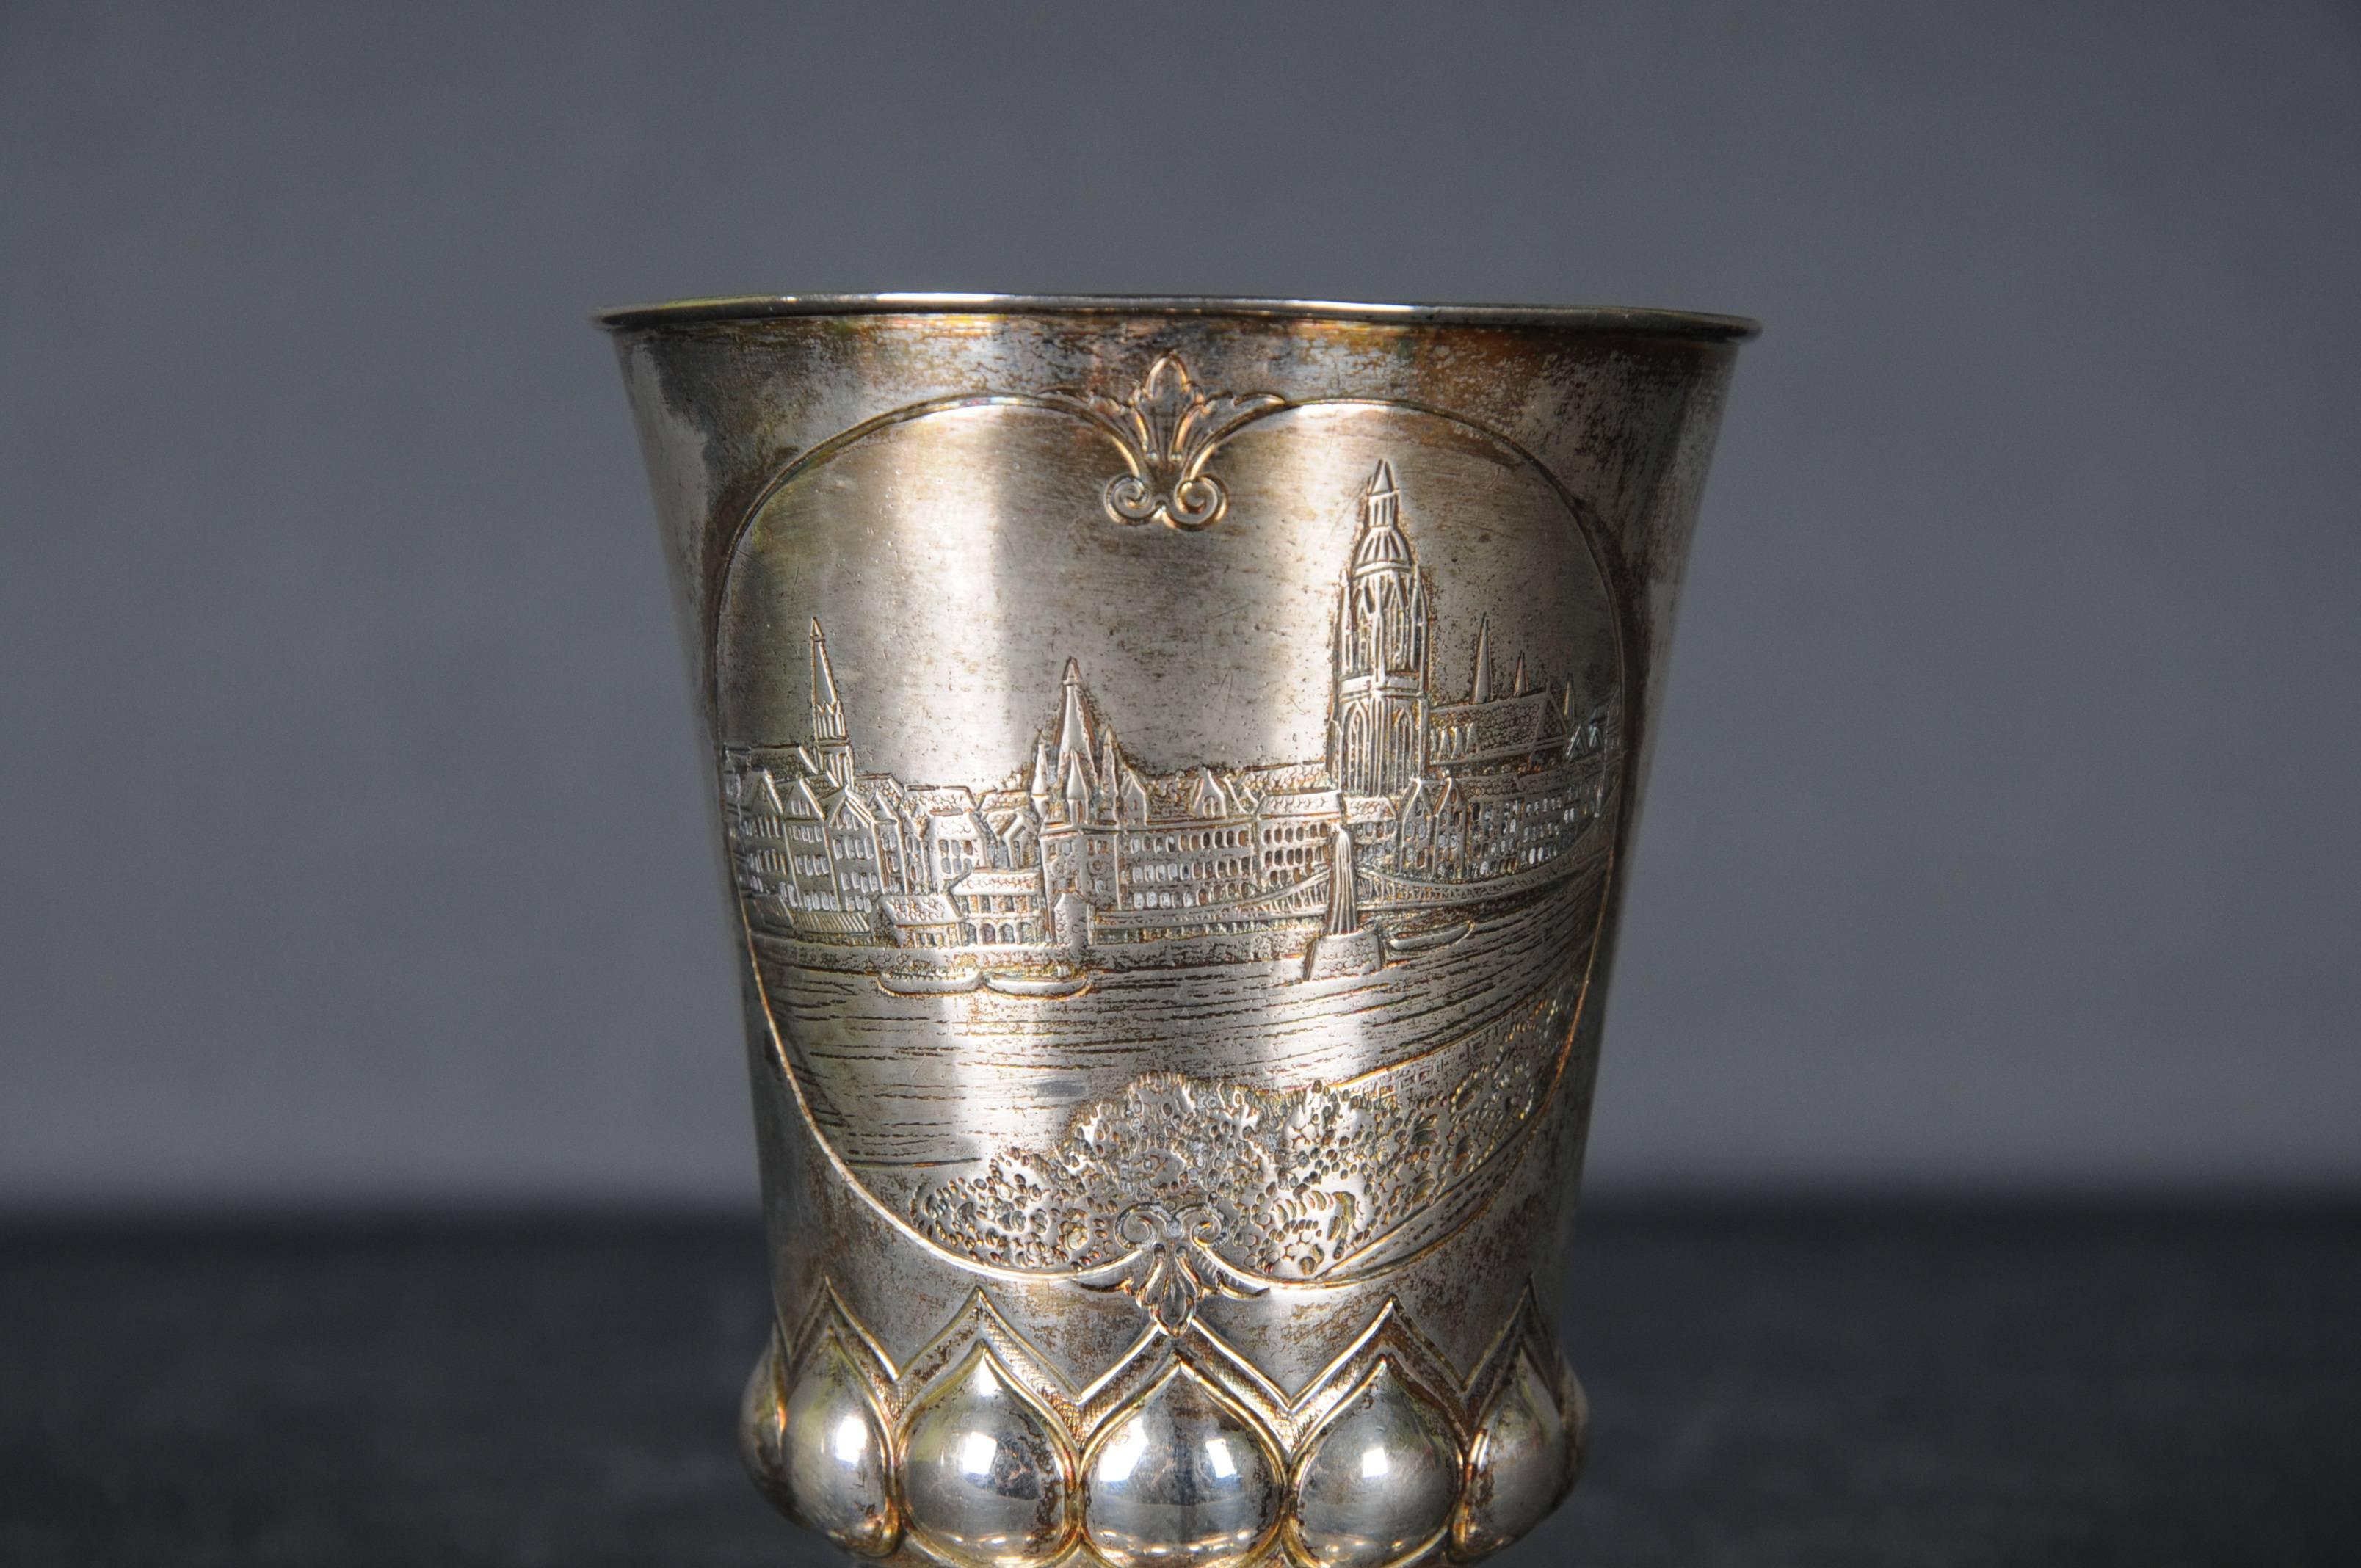 Antique Silver Footcup 800er Silver Germany Cup, gilded, German City View 

with engraving
Inside Gold plated 

Weight 109 grams.
